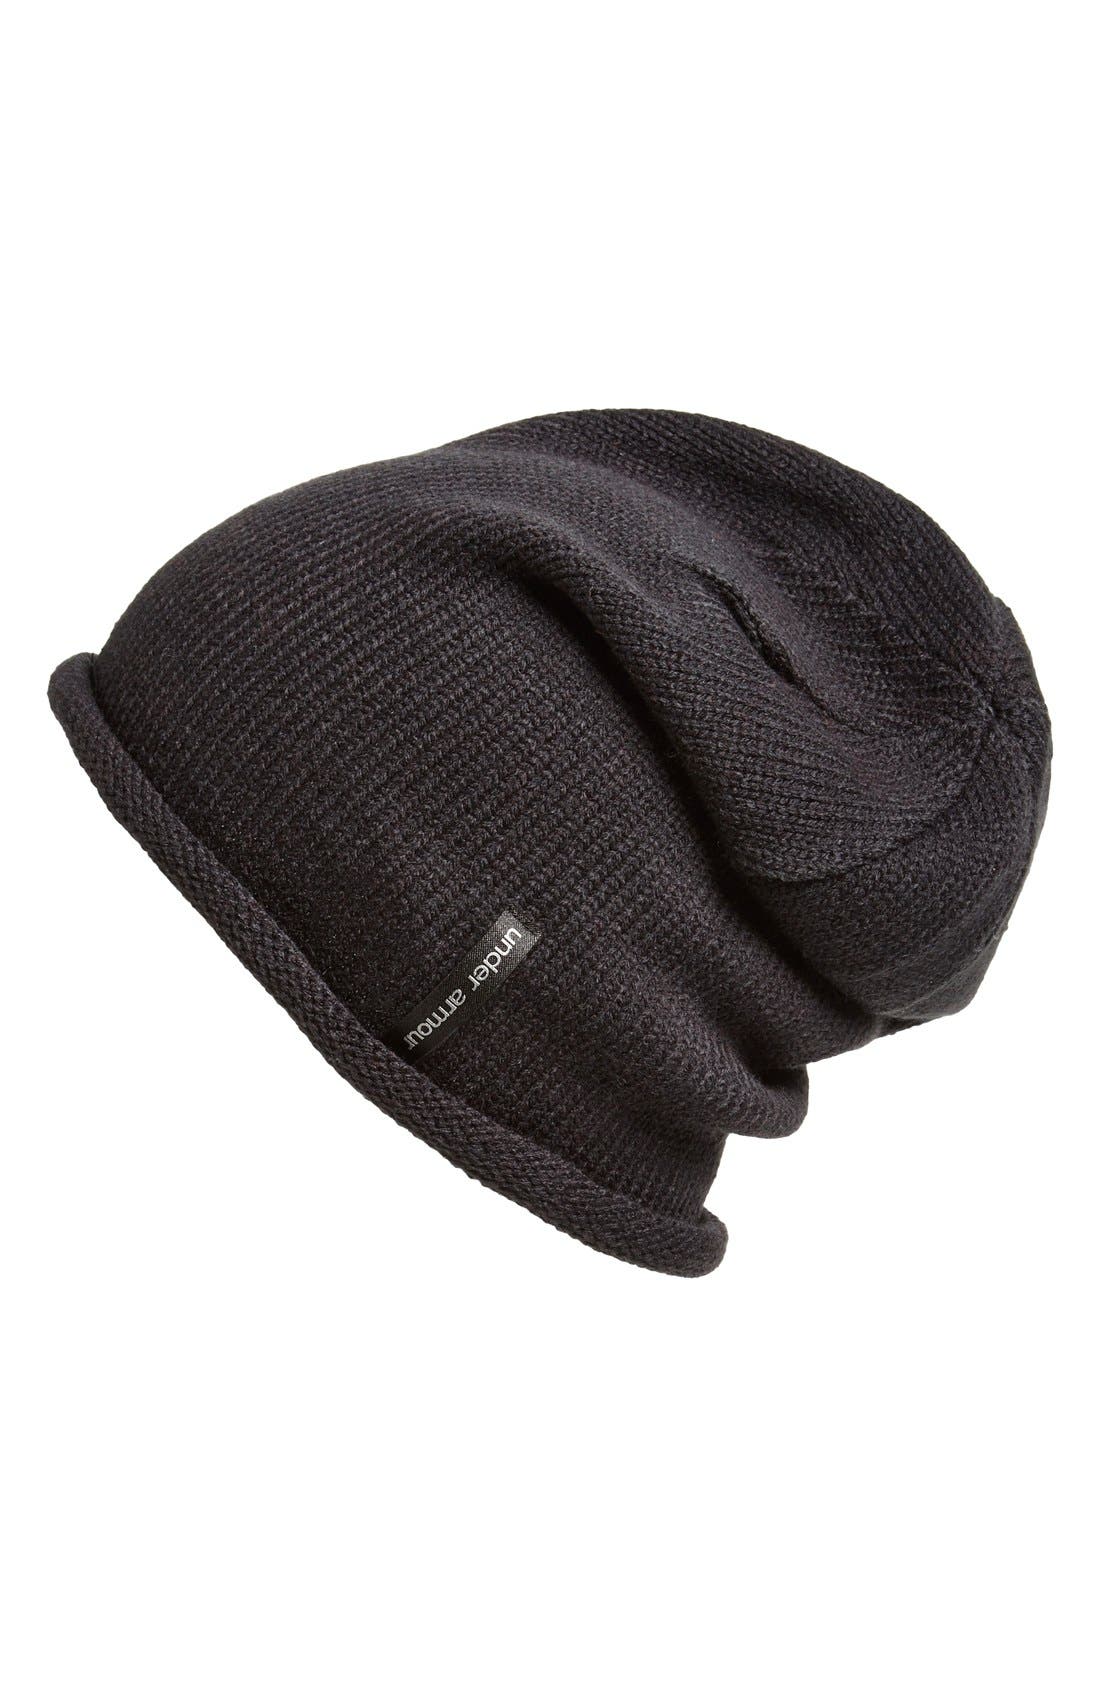 Under Armour Jersey Slouch Beanie 